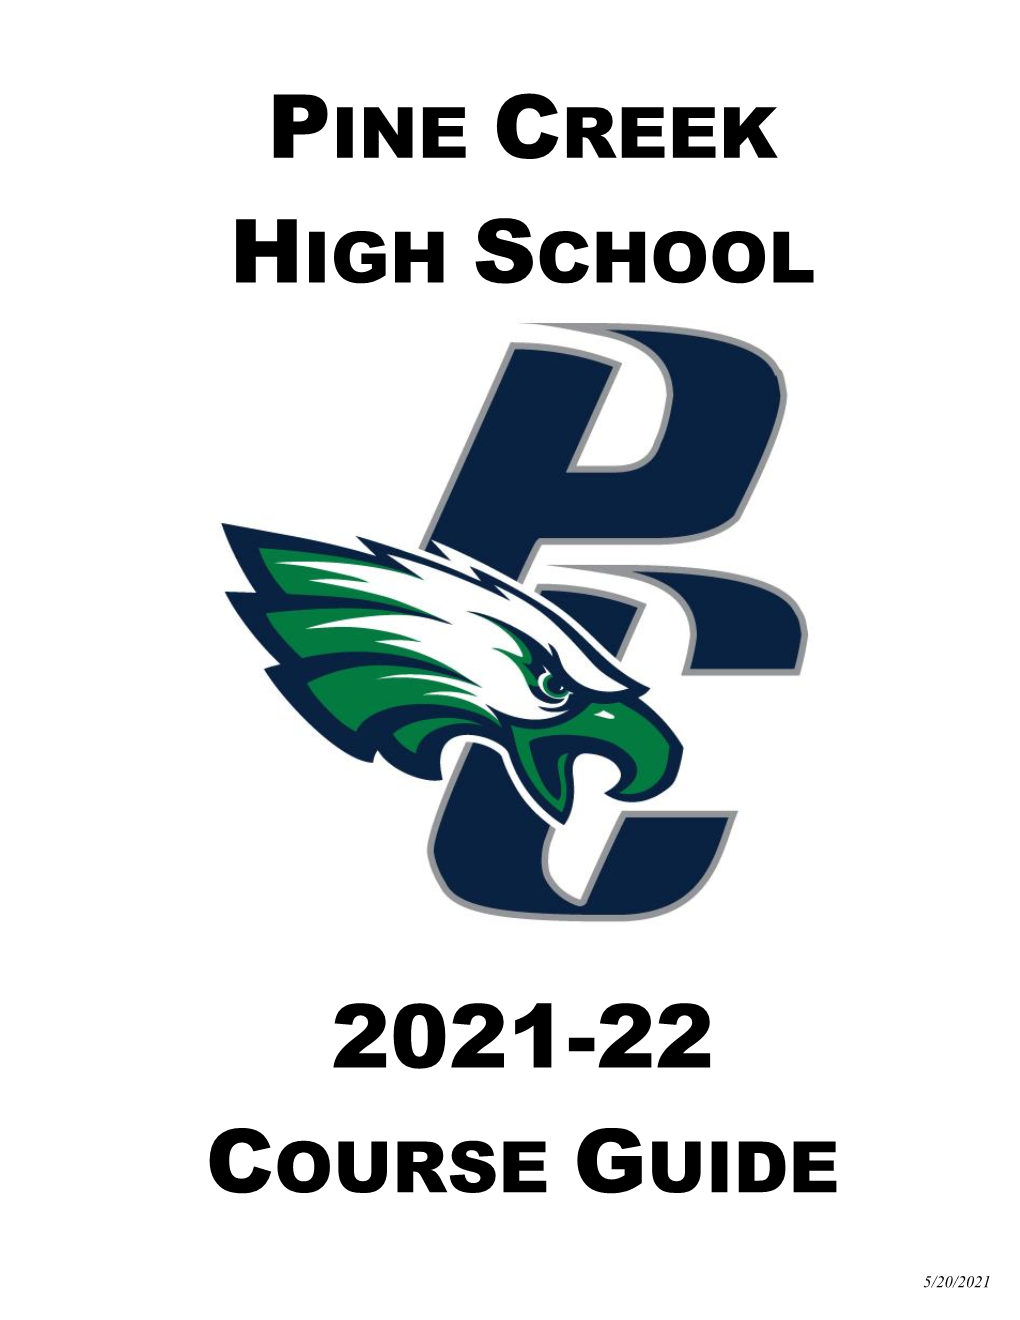 PINE CREEK HIGH SCHOOL Academy District 20 Course Guide